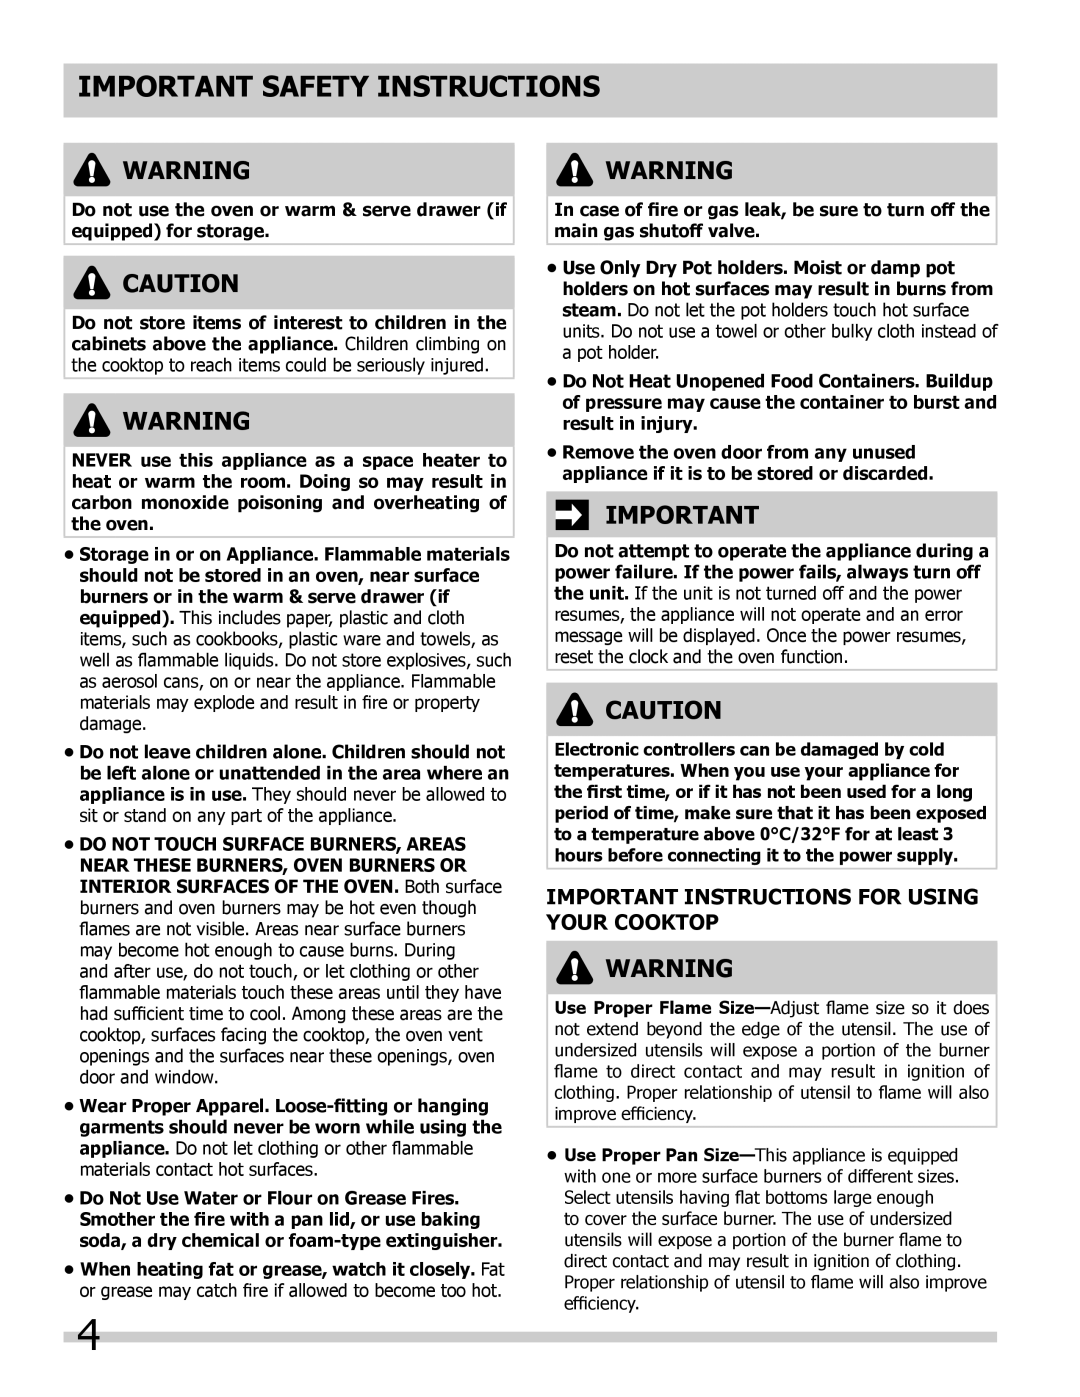 Frigidaire 318205854 manual IMPORTANT INSTRUCTIONS FOR USING YOUR cooktop, Important Safety Instructions 